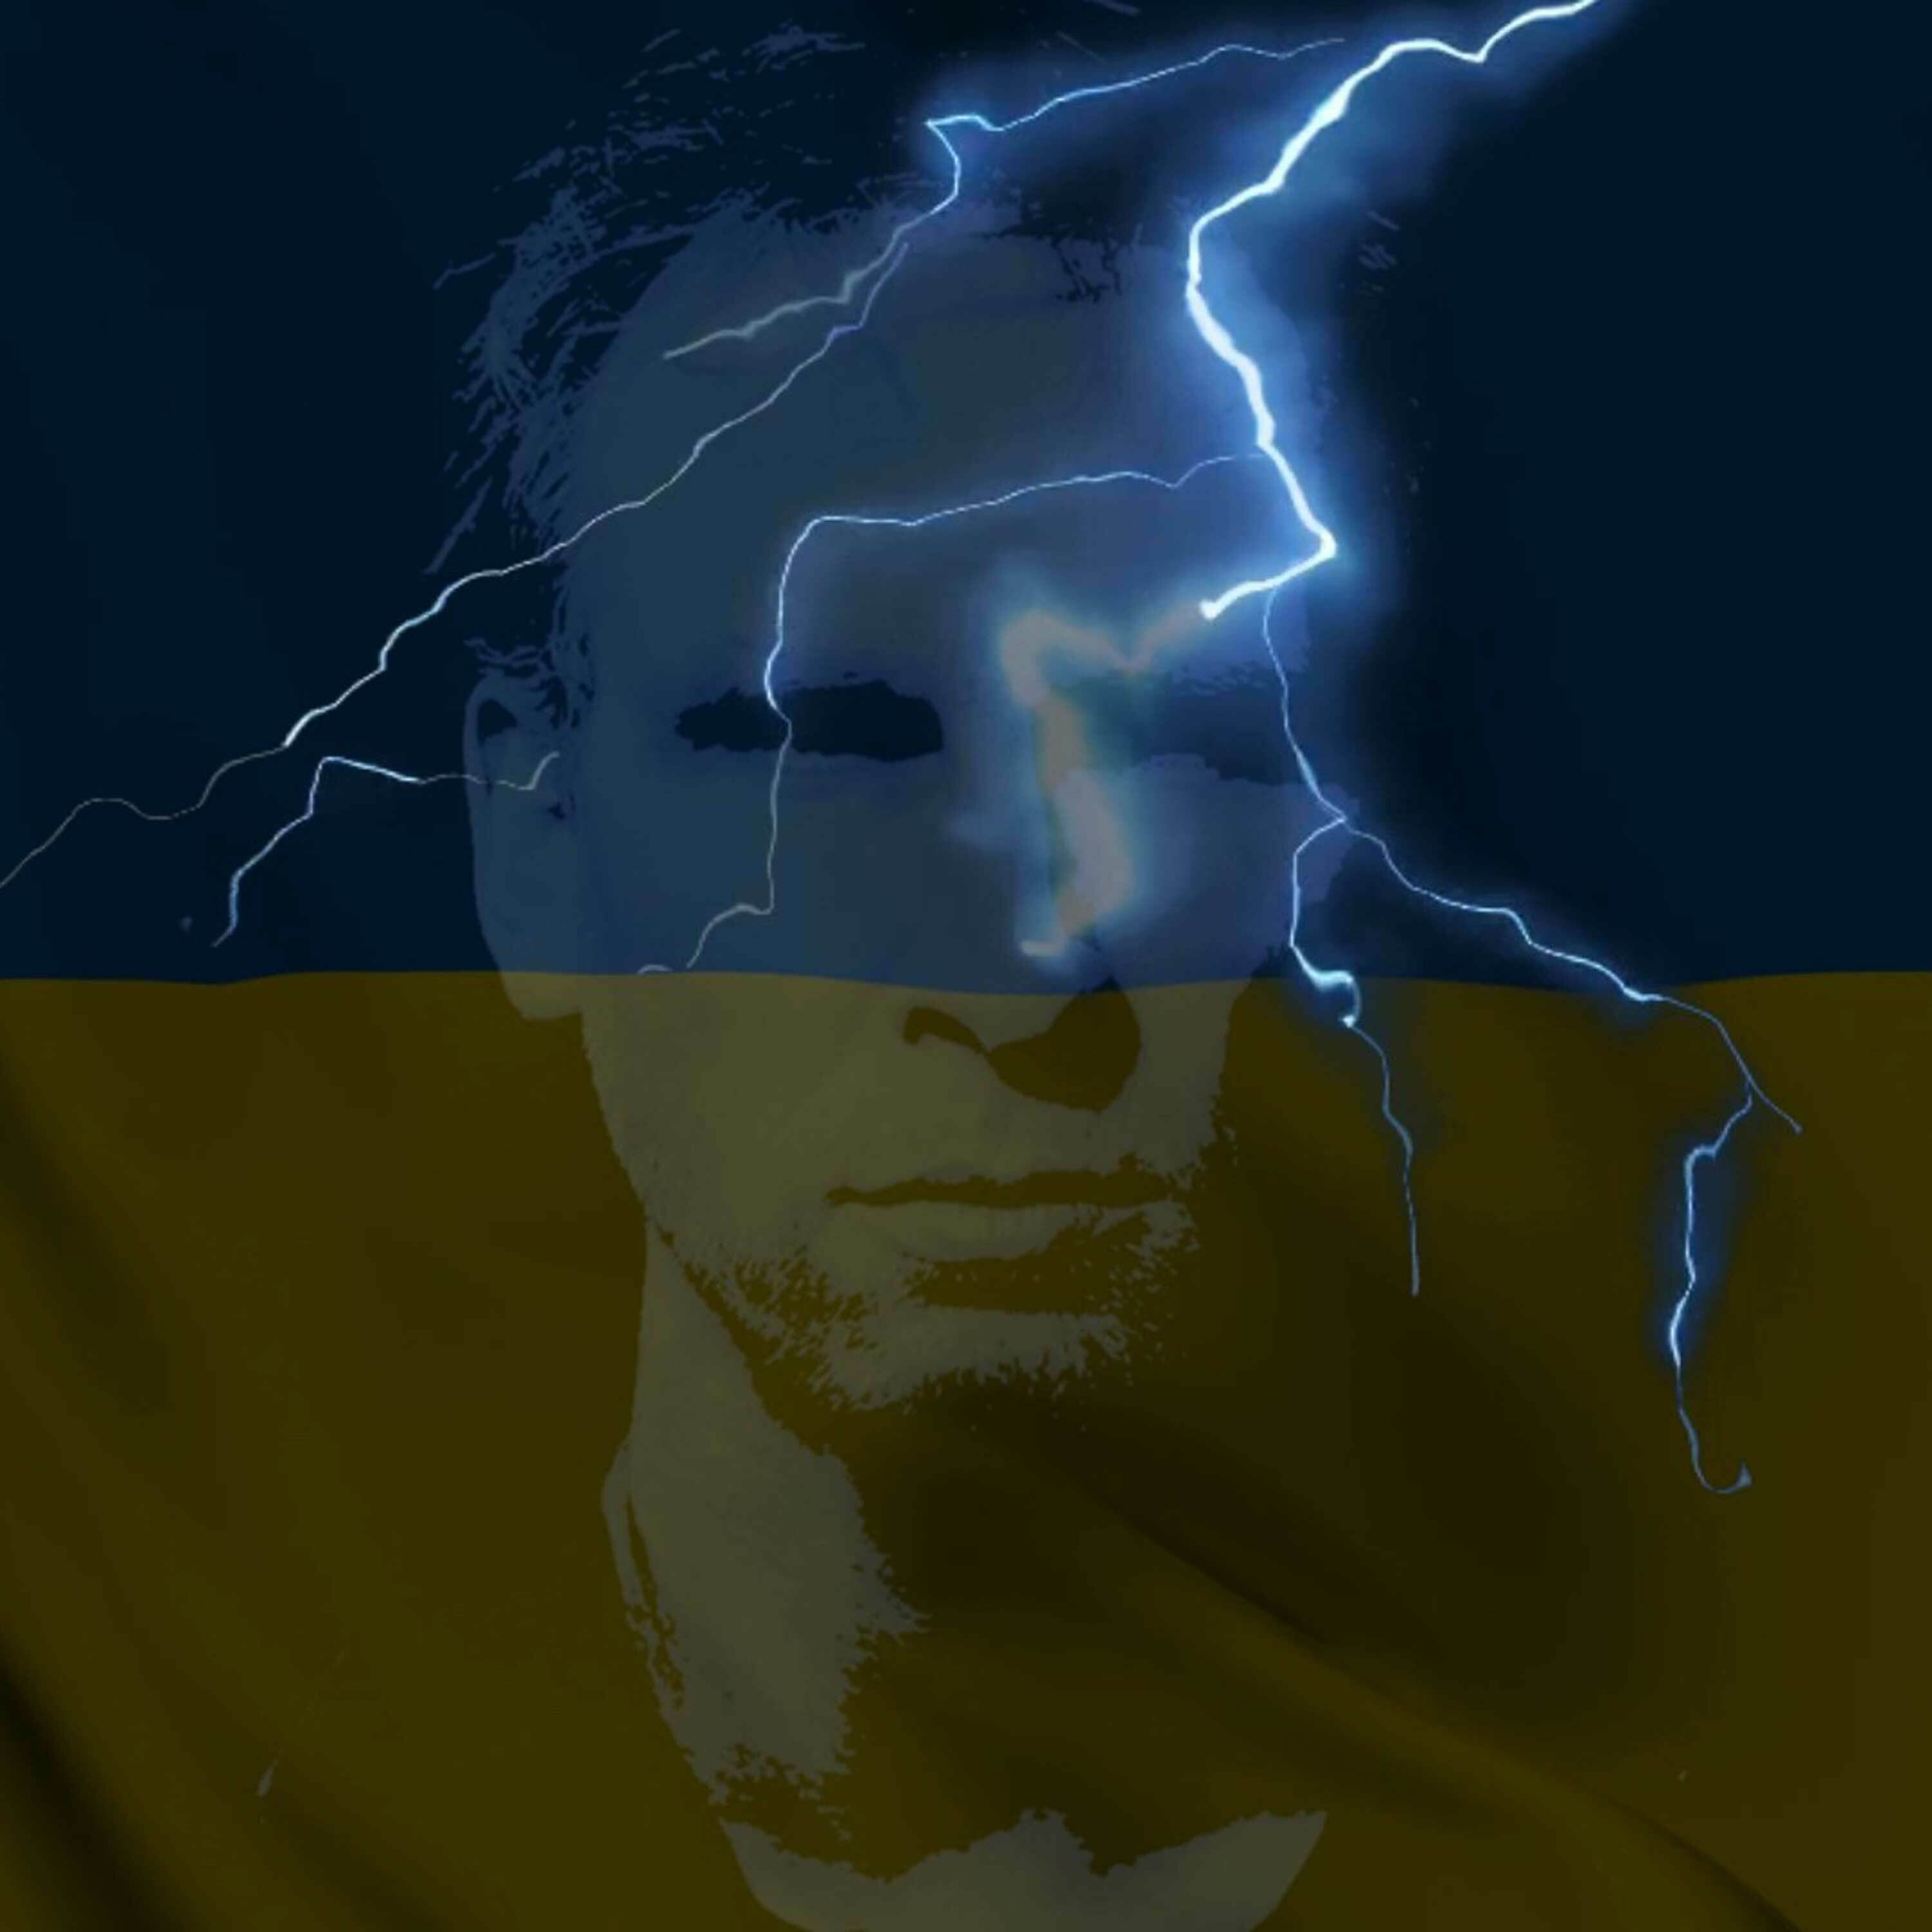 Heroes of souls - My song for Ukraine - Spendenaktion / Please donate